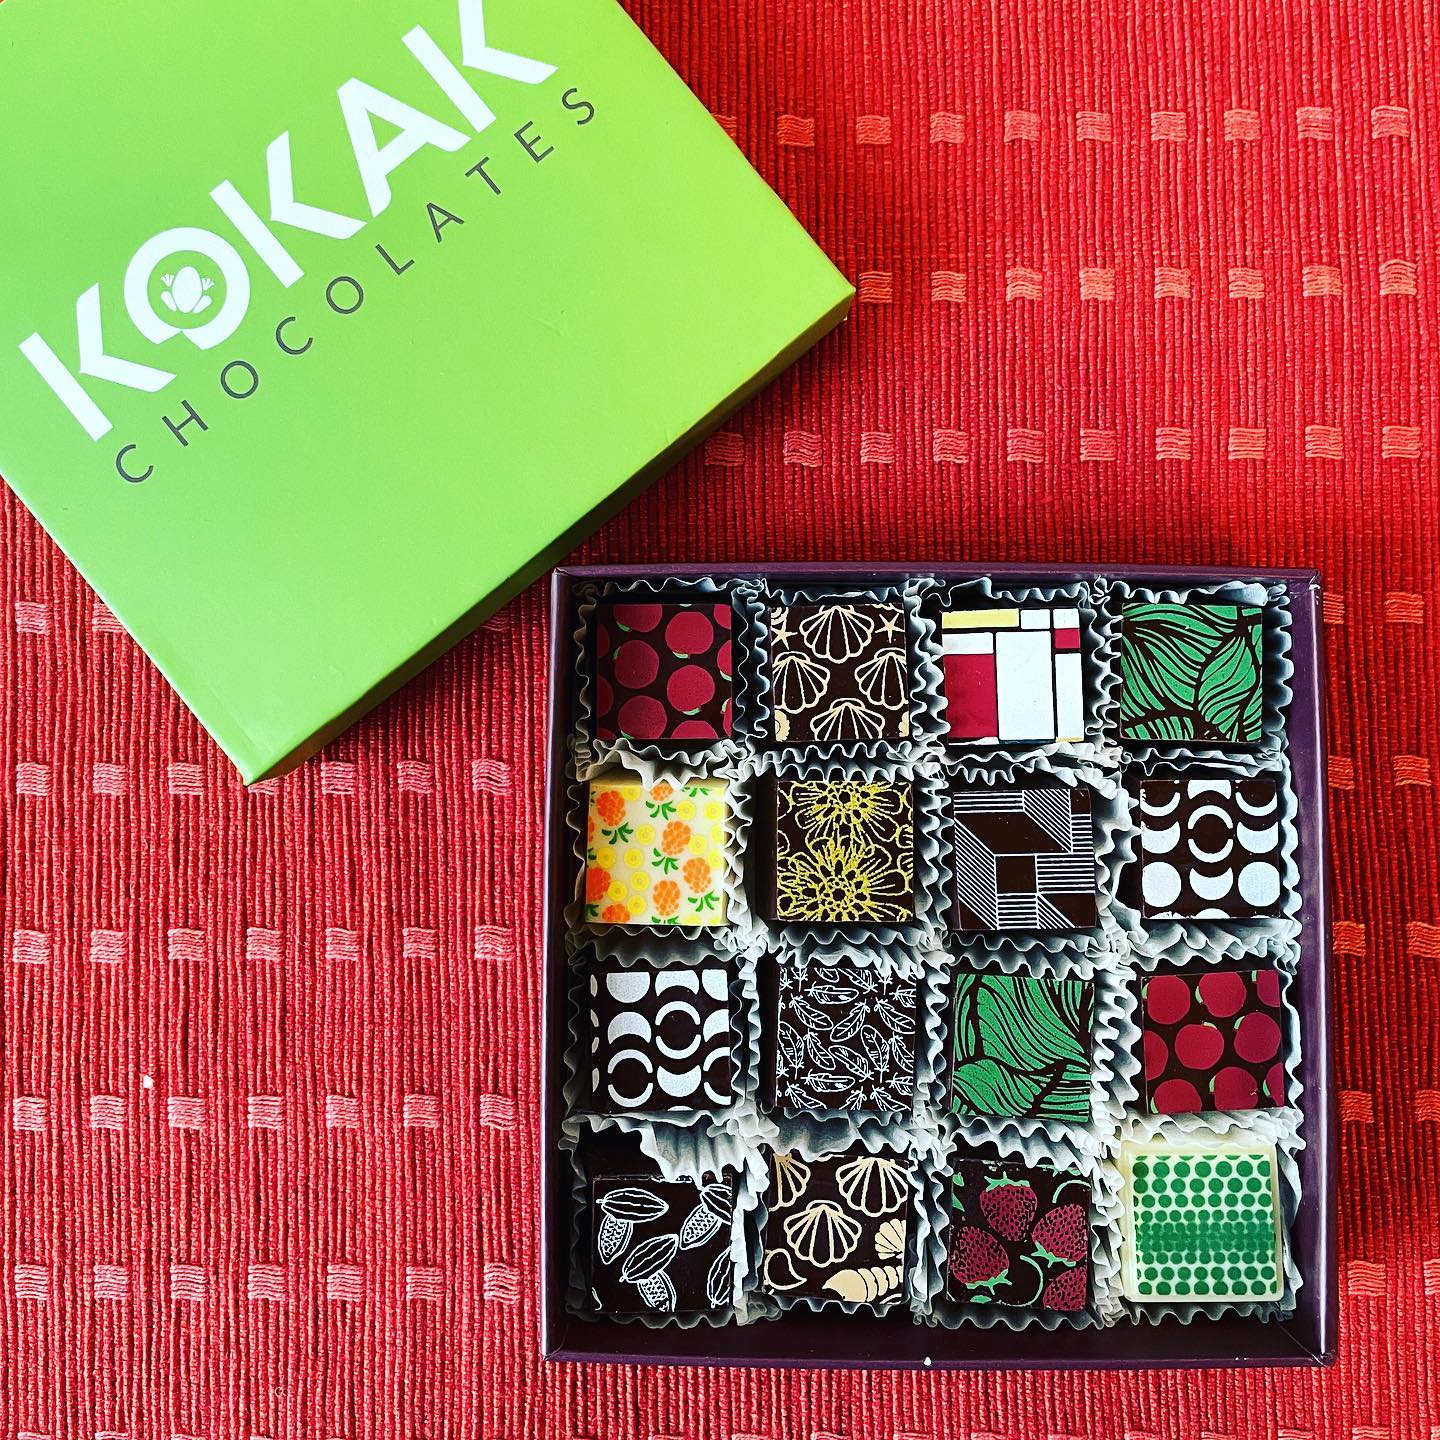 It’s a good day when you have @kokakchocolates in your possession. Thanks to my sis for introducing me to these incredible single origin heirloom chocolates by Carol Gancia.